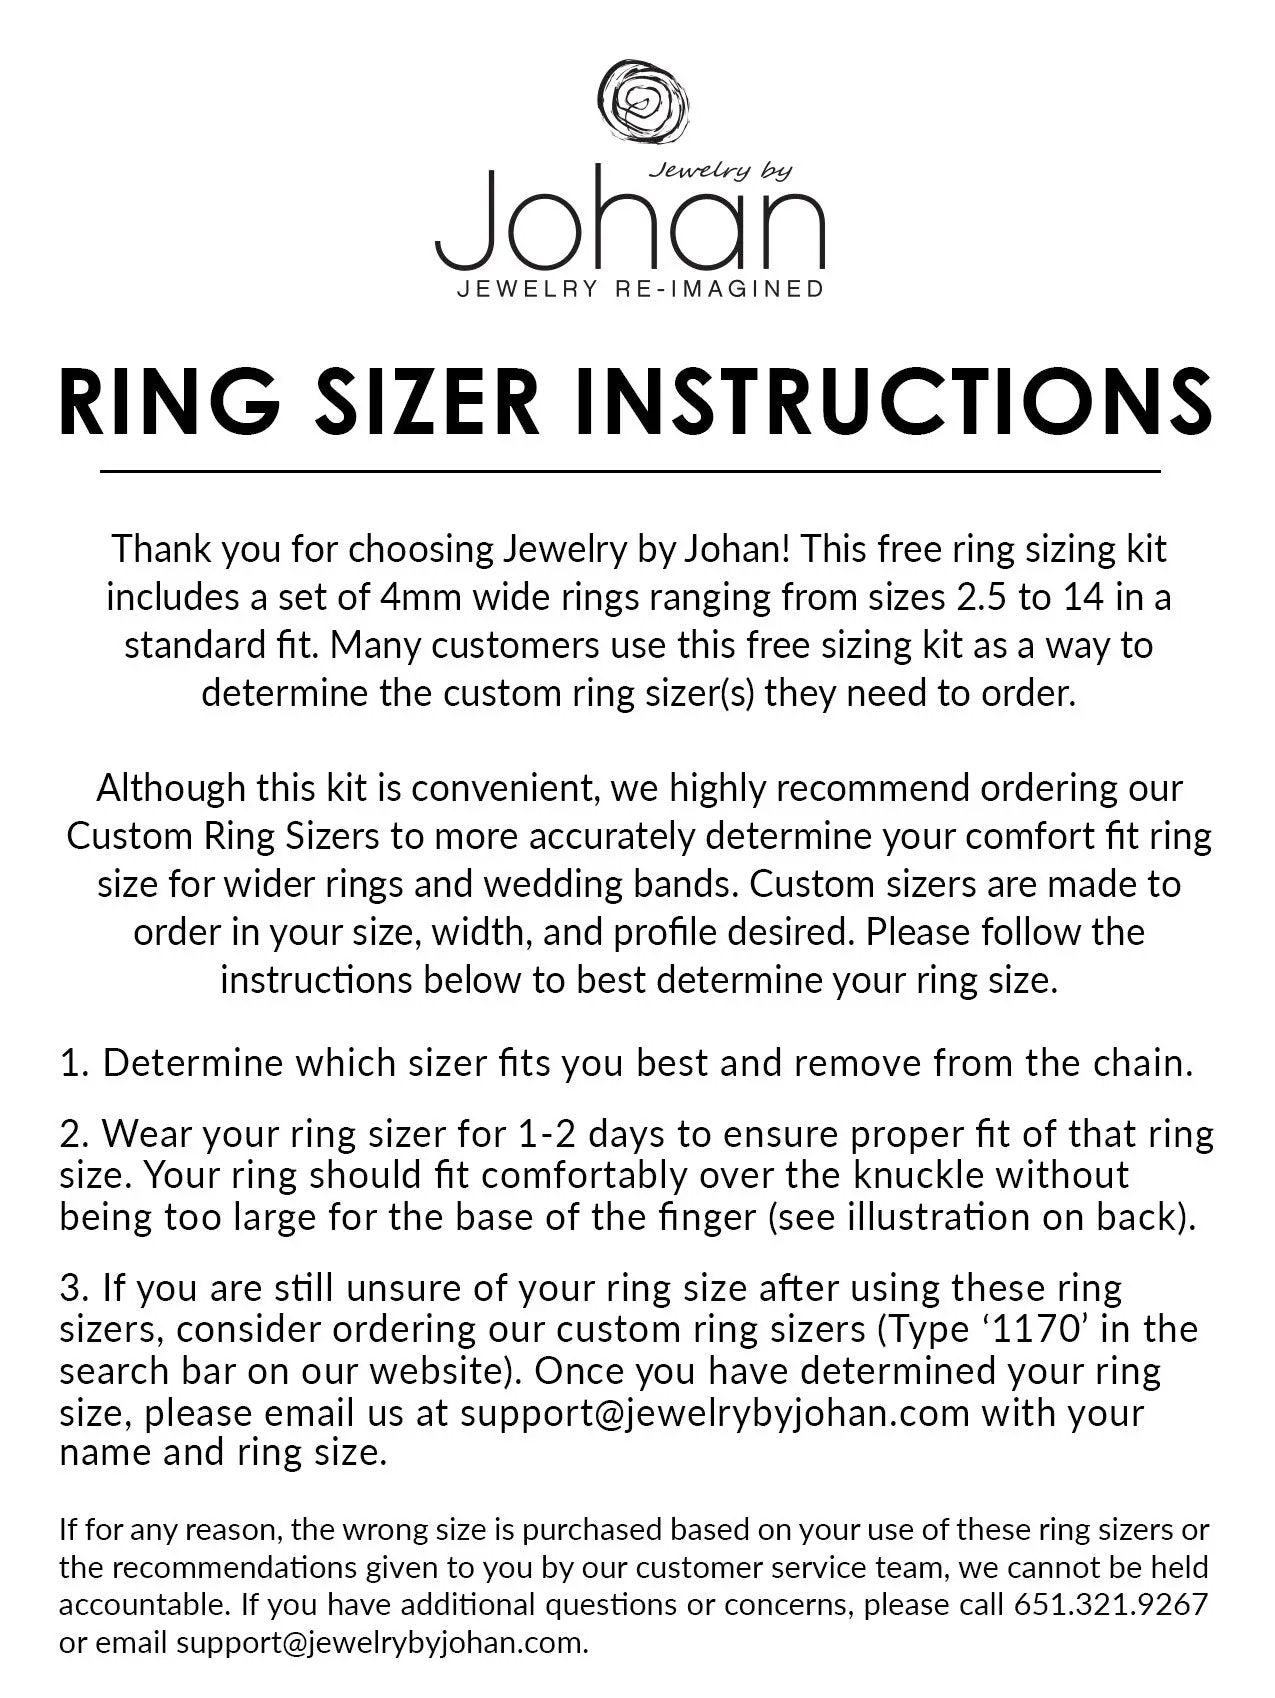 Are Ring Sizes Same in US & Mexico? | by juliwhite | Medium